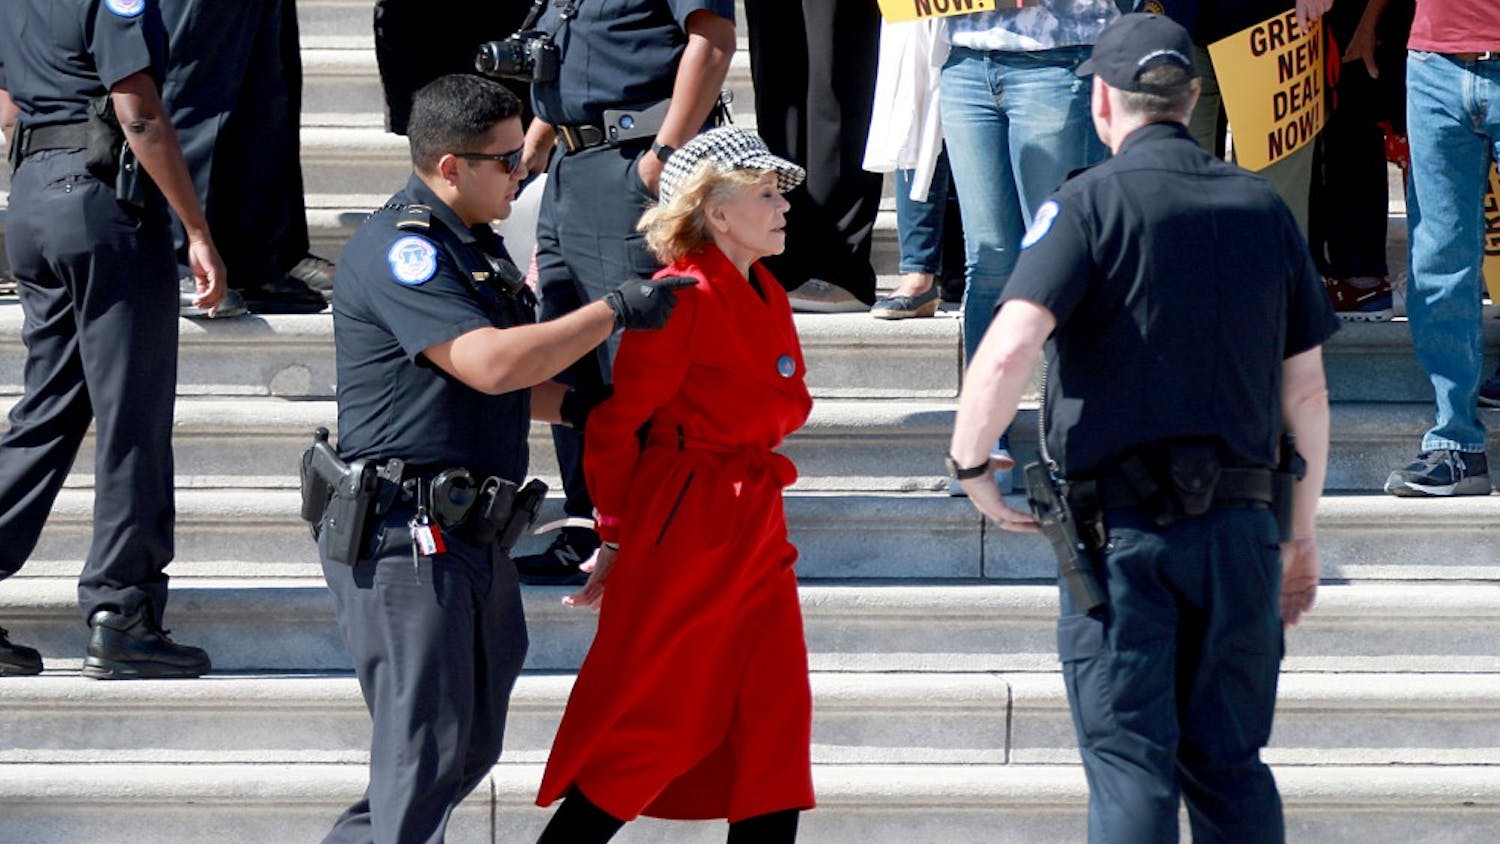 Actress Jane Fonda is arrested for blocking a street in front of the U.S. Capitol on Oct. 18 during a climate change protest and rally on Capitol Hill, in Washington, D.C. Protesters are demanding urgent action on adapting the Green New Deal, implementing clean, renewable energy, and ending all new fossil fuel exploration and drilling.